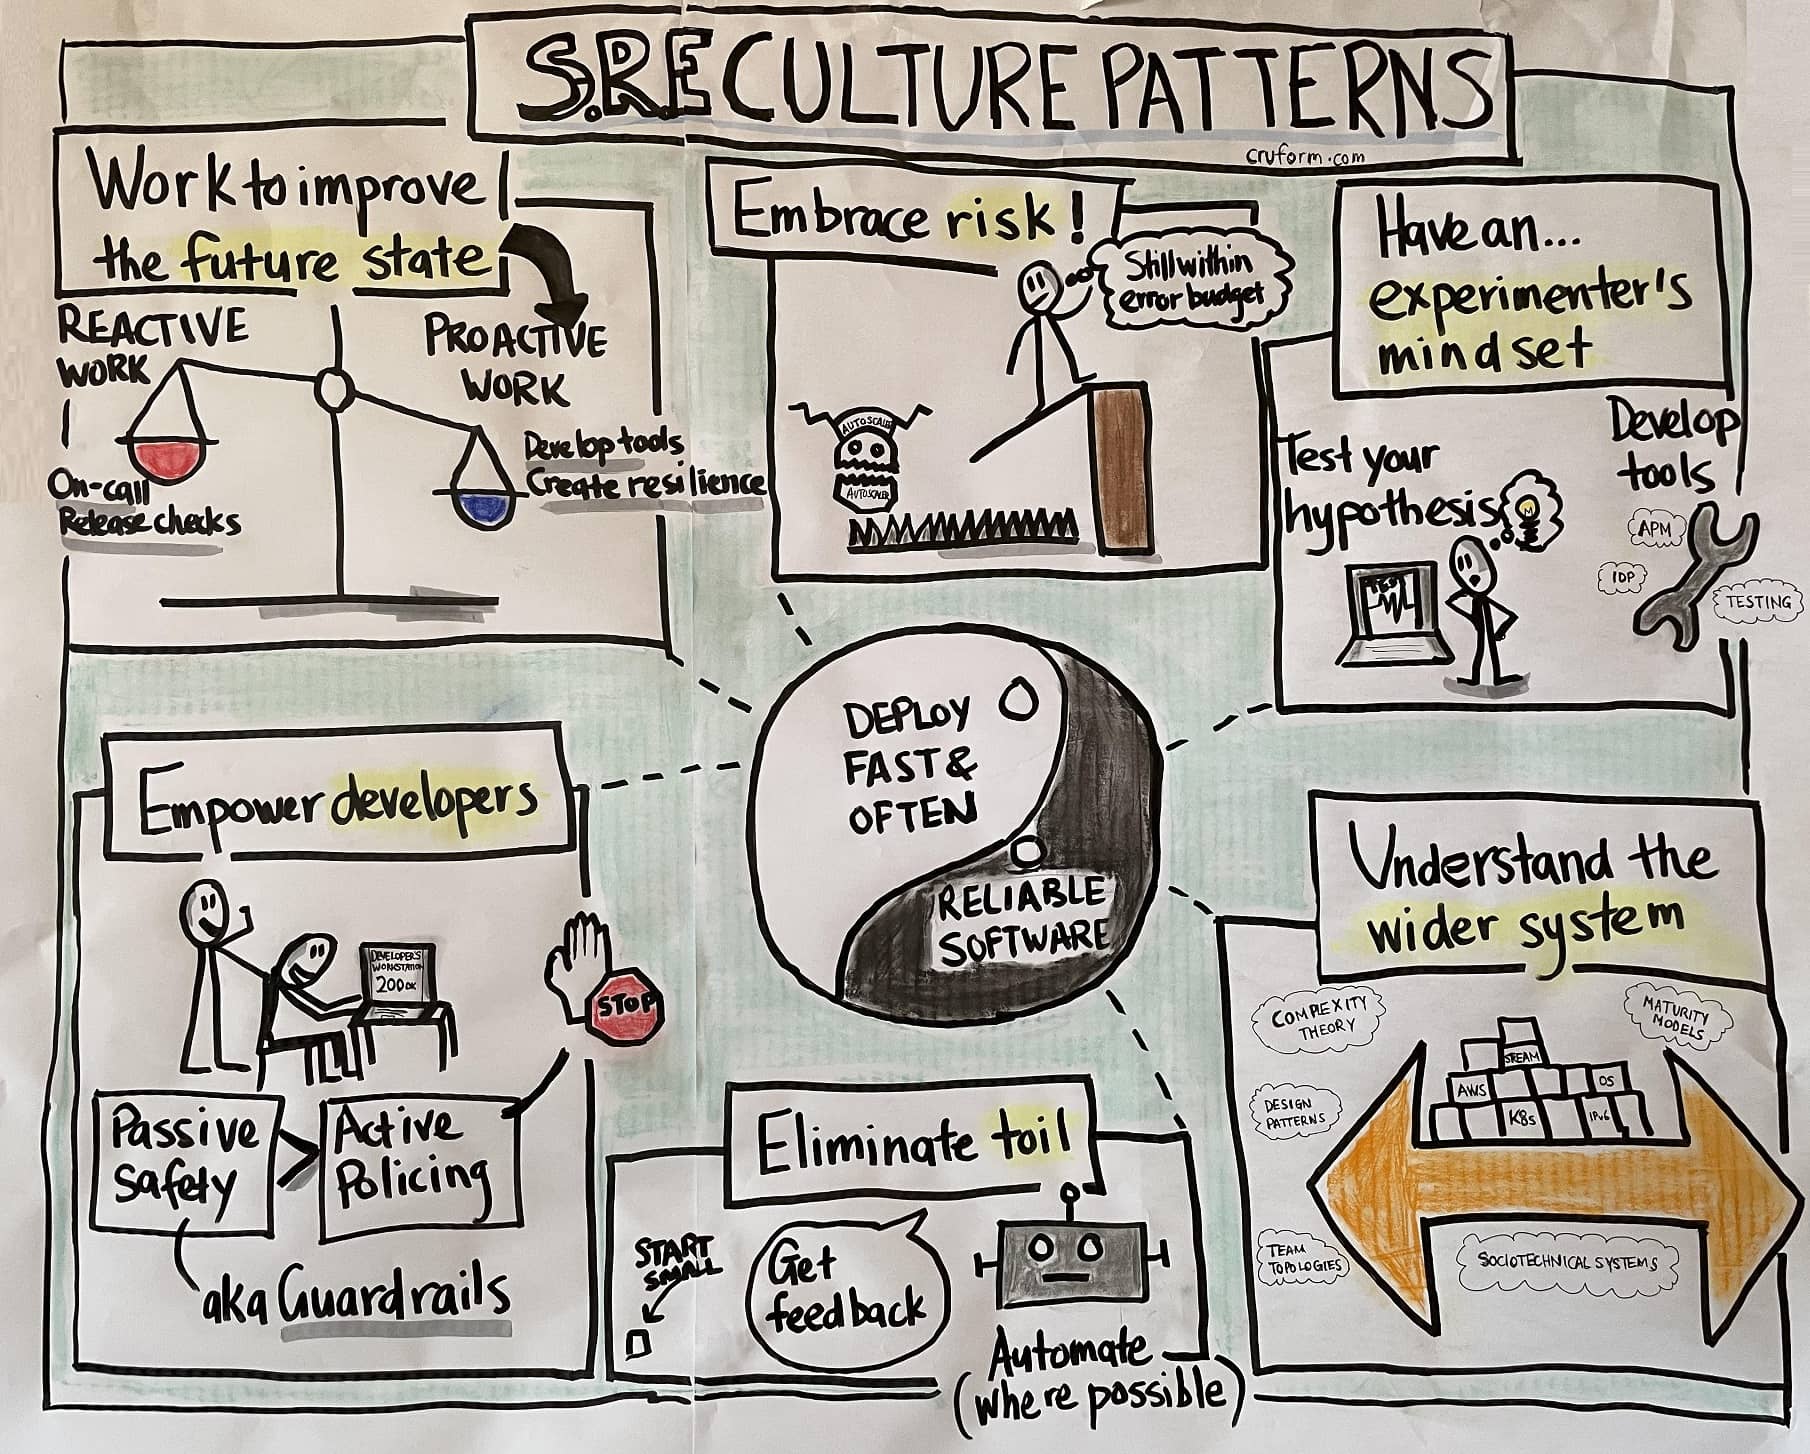 Site Reliability Engineering culture patterns described in a visual summary by Ash Patel of SREpath.com